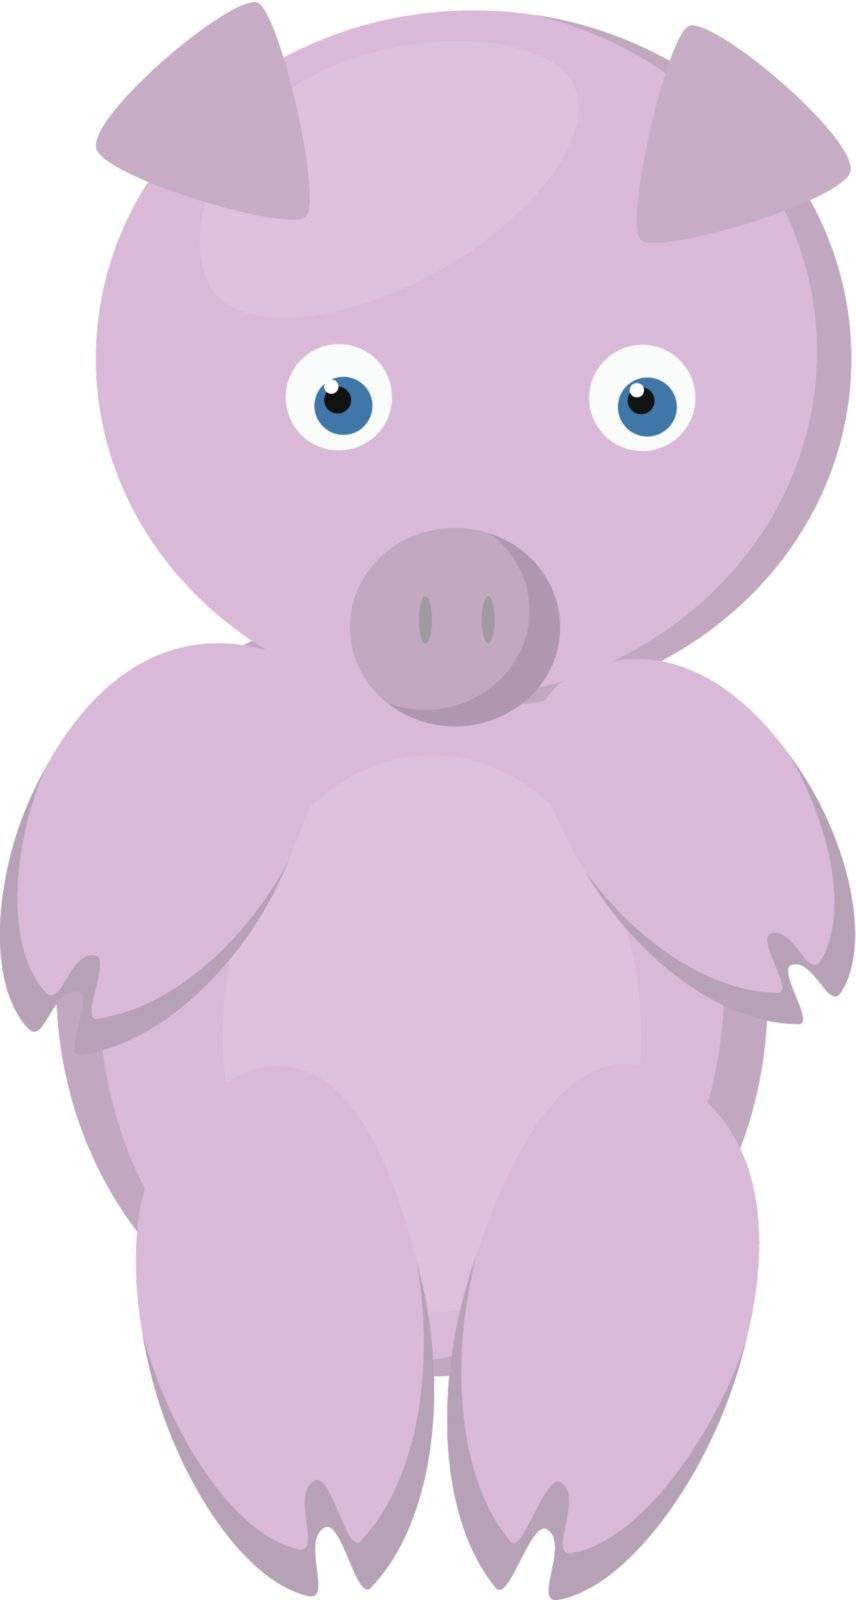 Pink pig by anytka